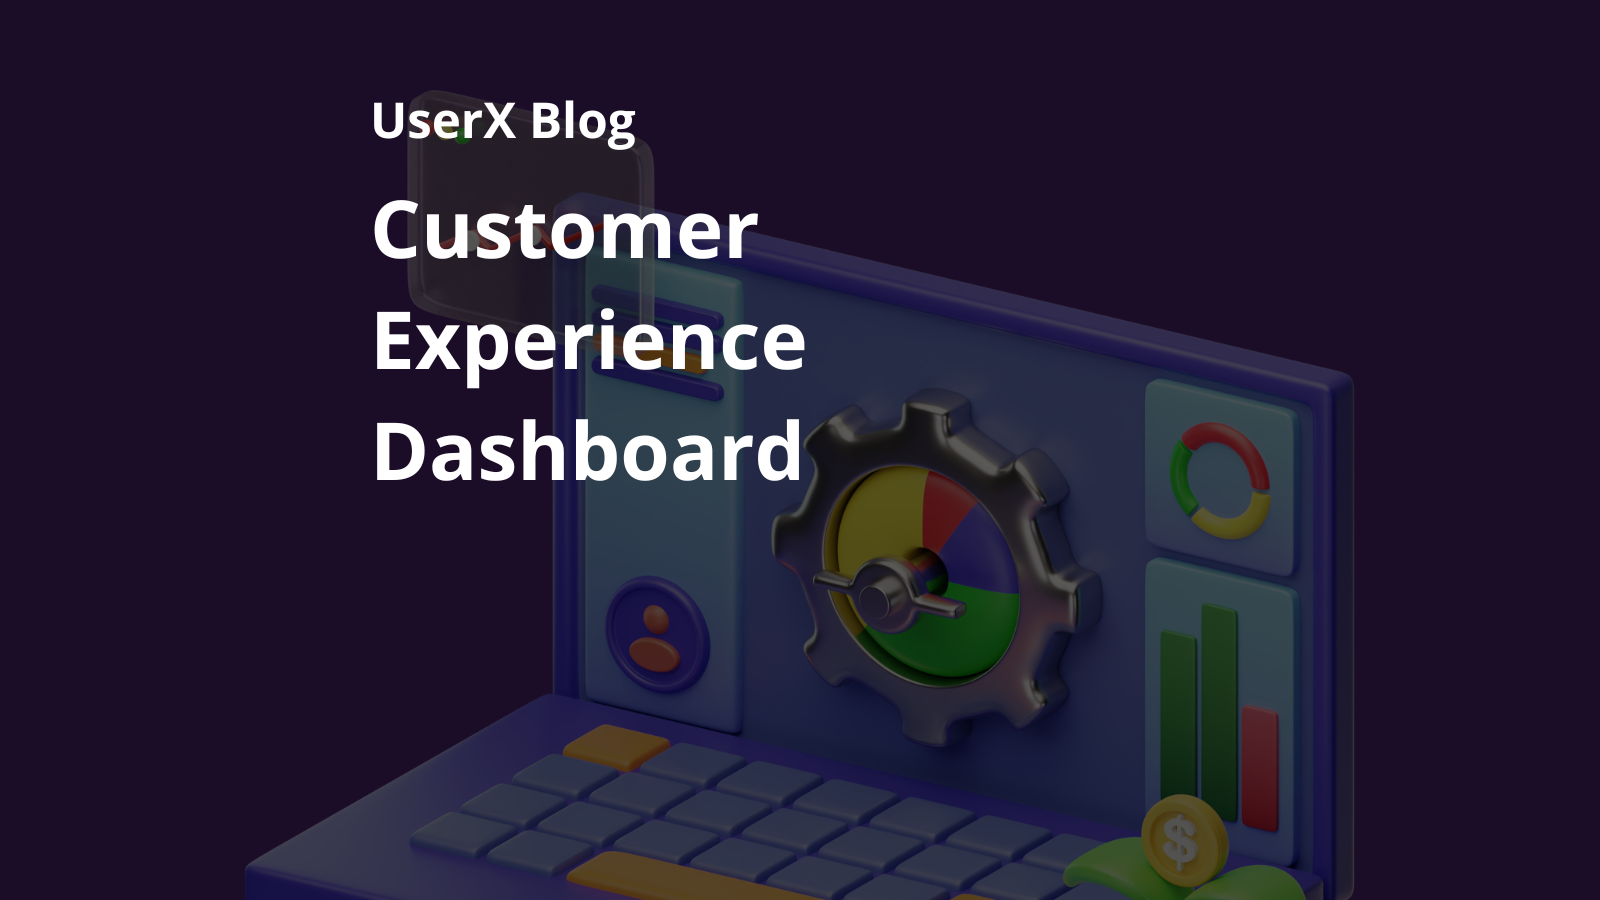 ustomer Experience (CX) Dashboards in optimizing mobile app interactions